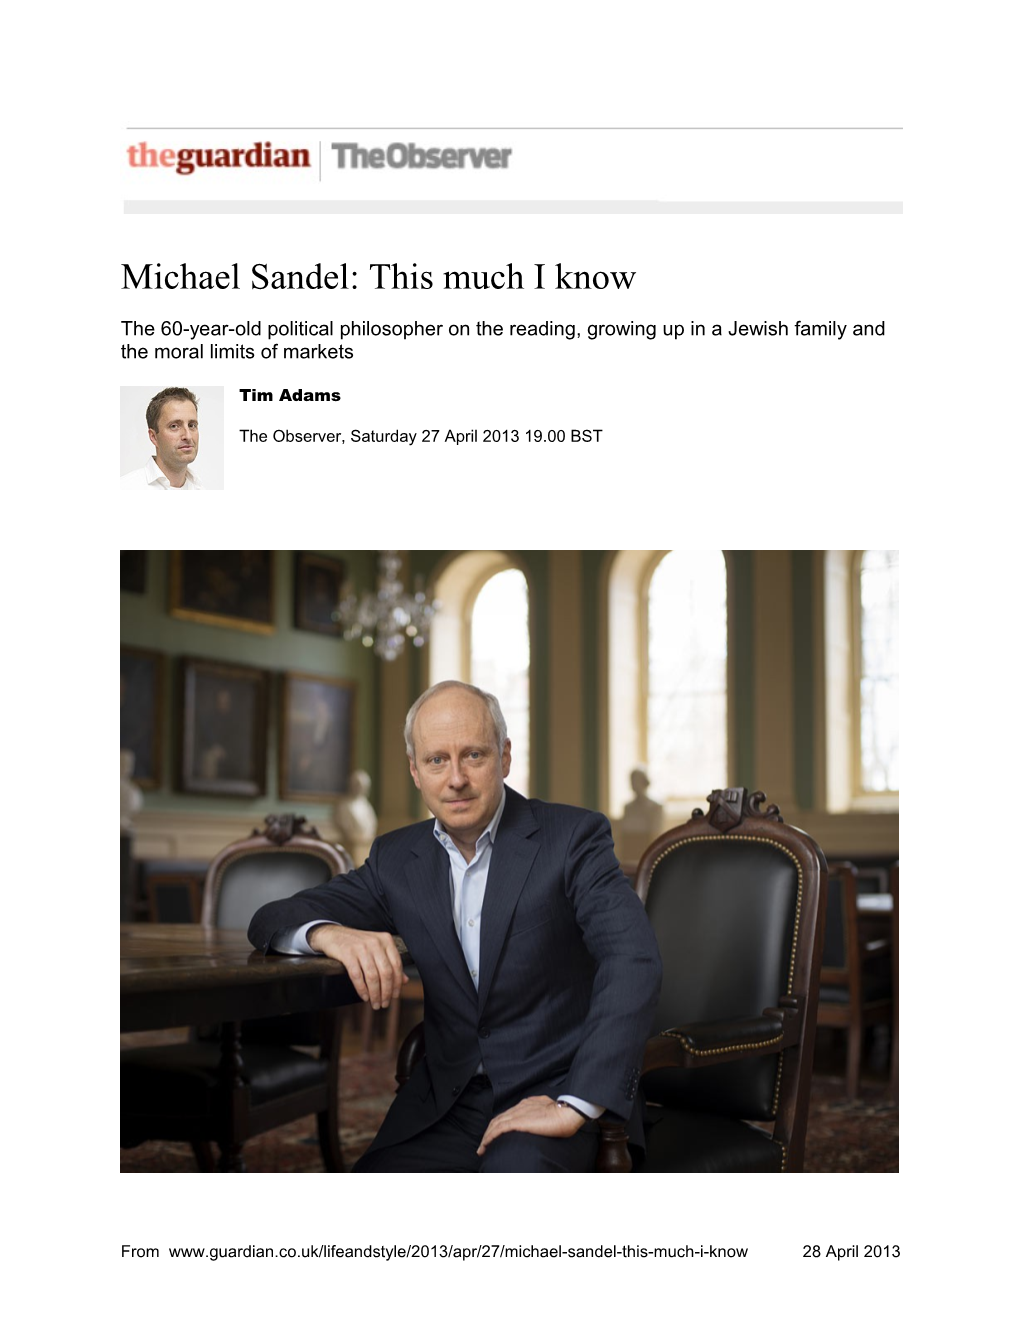 Michael Sandel: This Much I Know